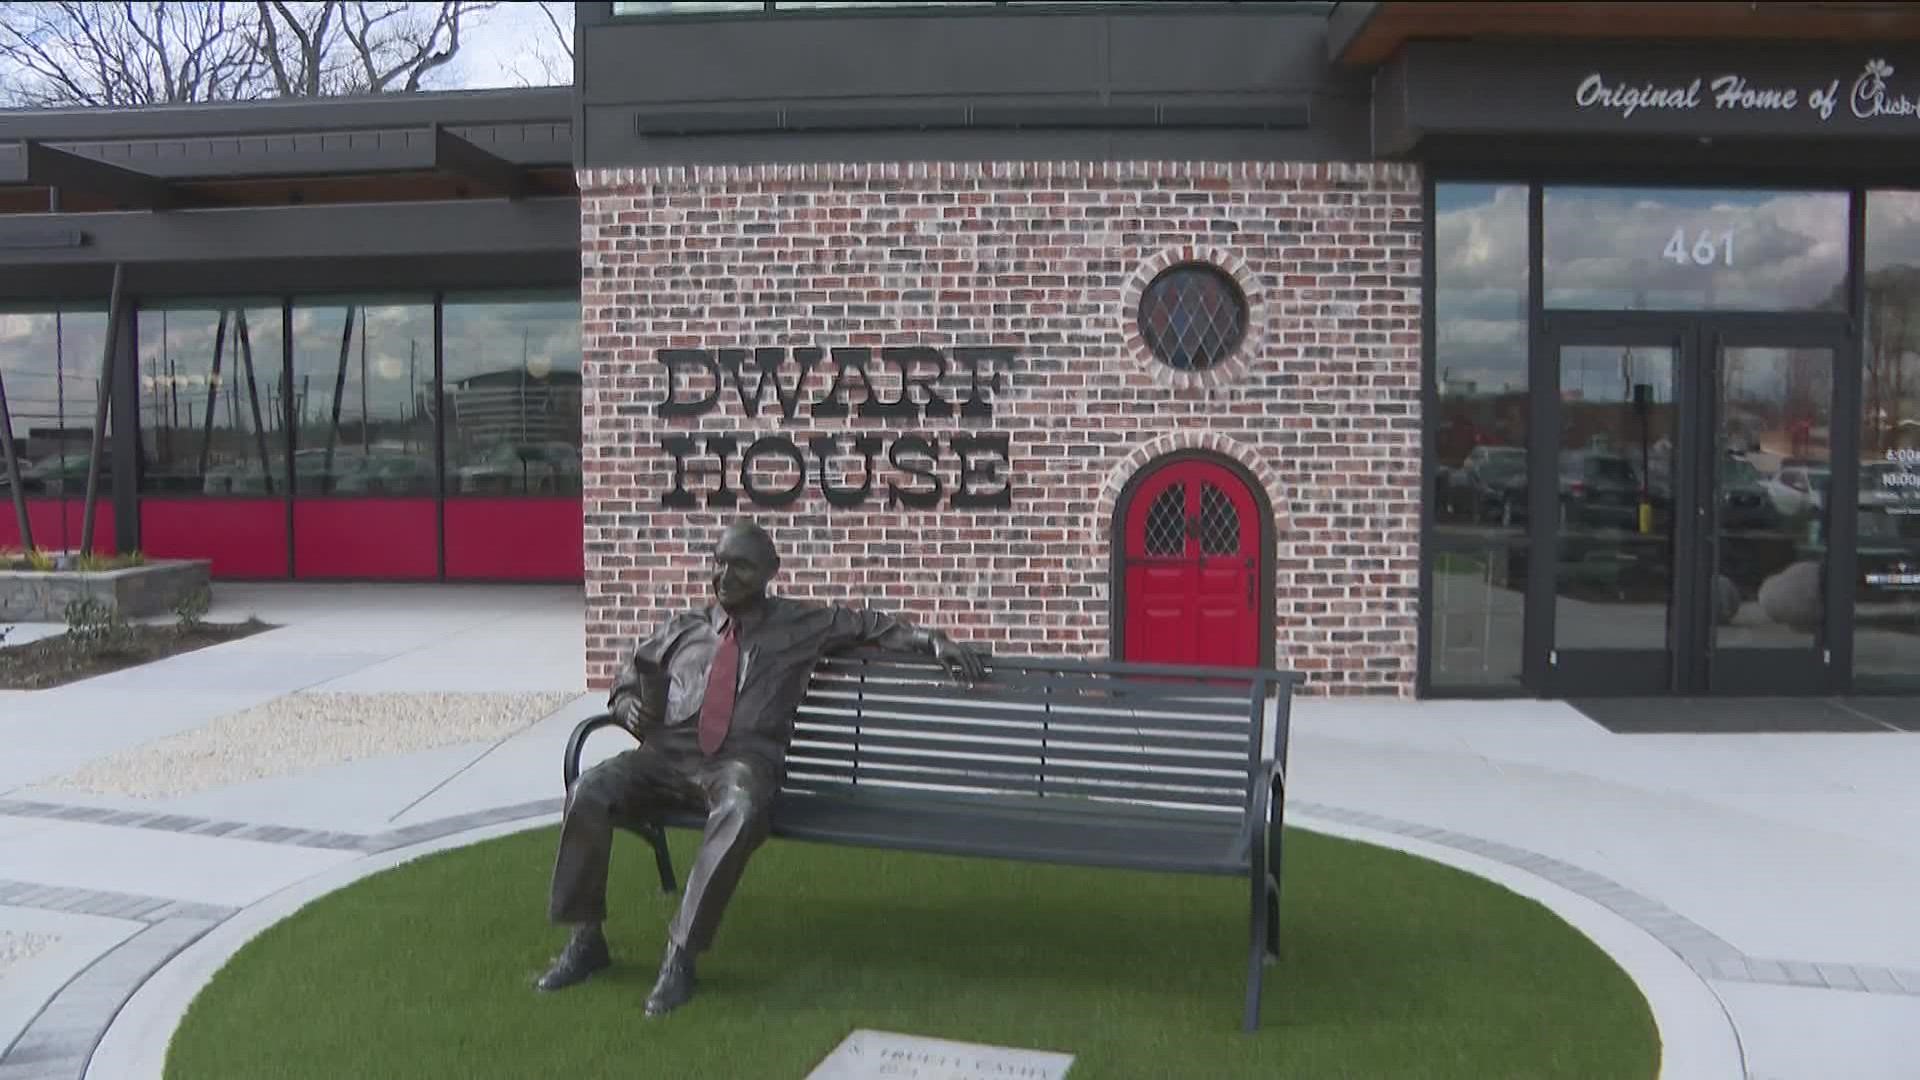 The Dwarf House, known for being the birthplace of the original Chick-fil-A chicken sandwich, will reopen to the public Thursday.